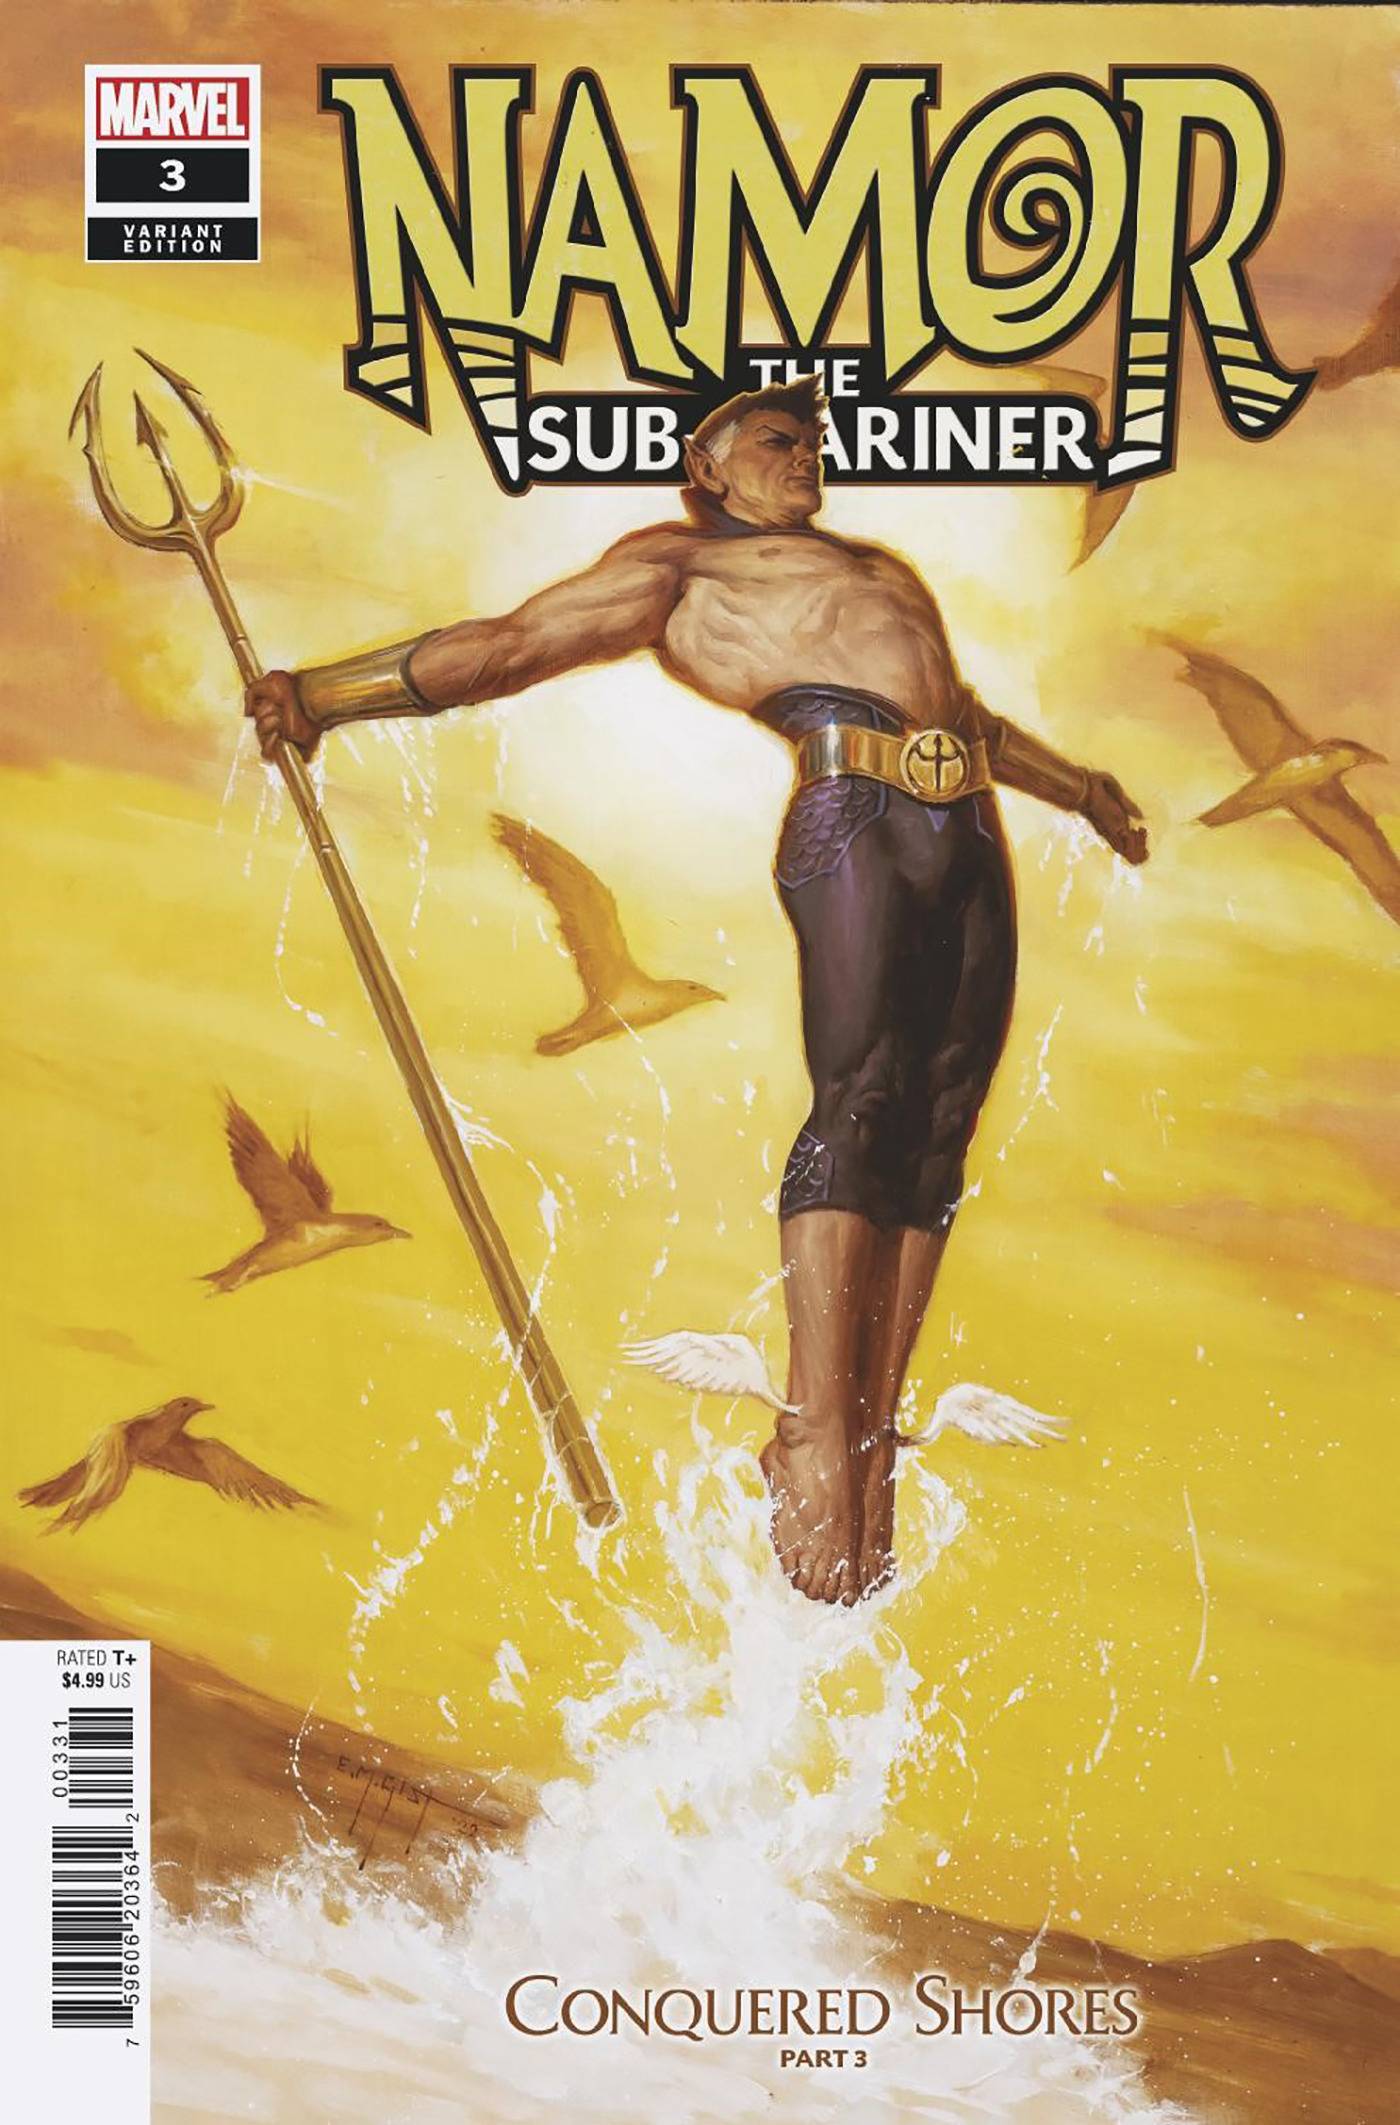 12/21/2022 NAMOR CONQUERED SHORES #3 (OF 5) 1:25 GIST VARIANT